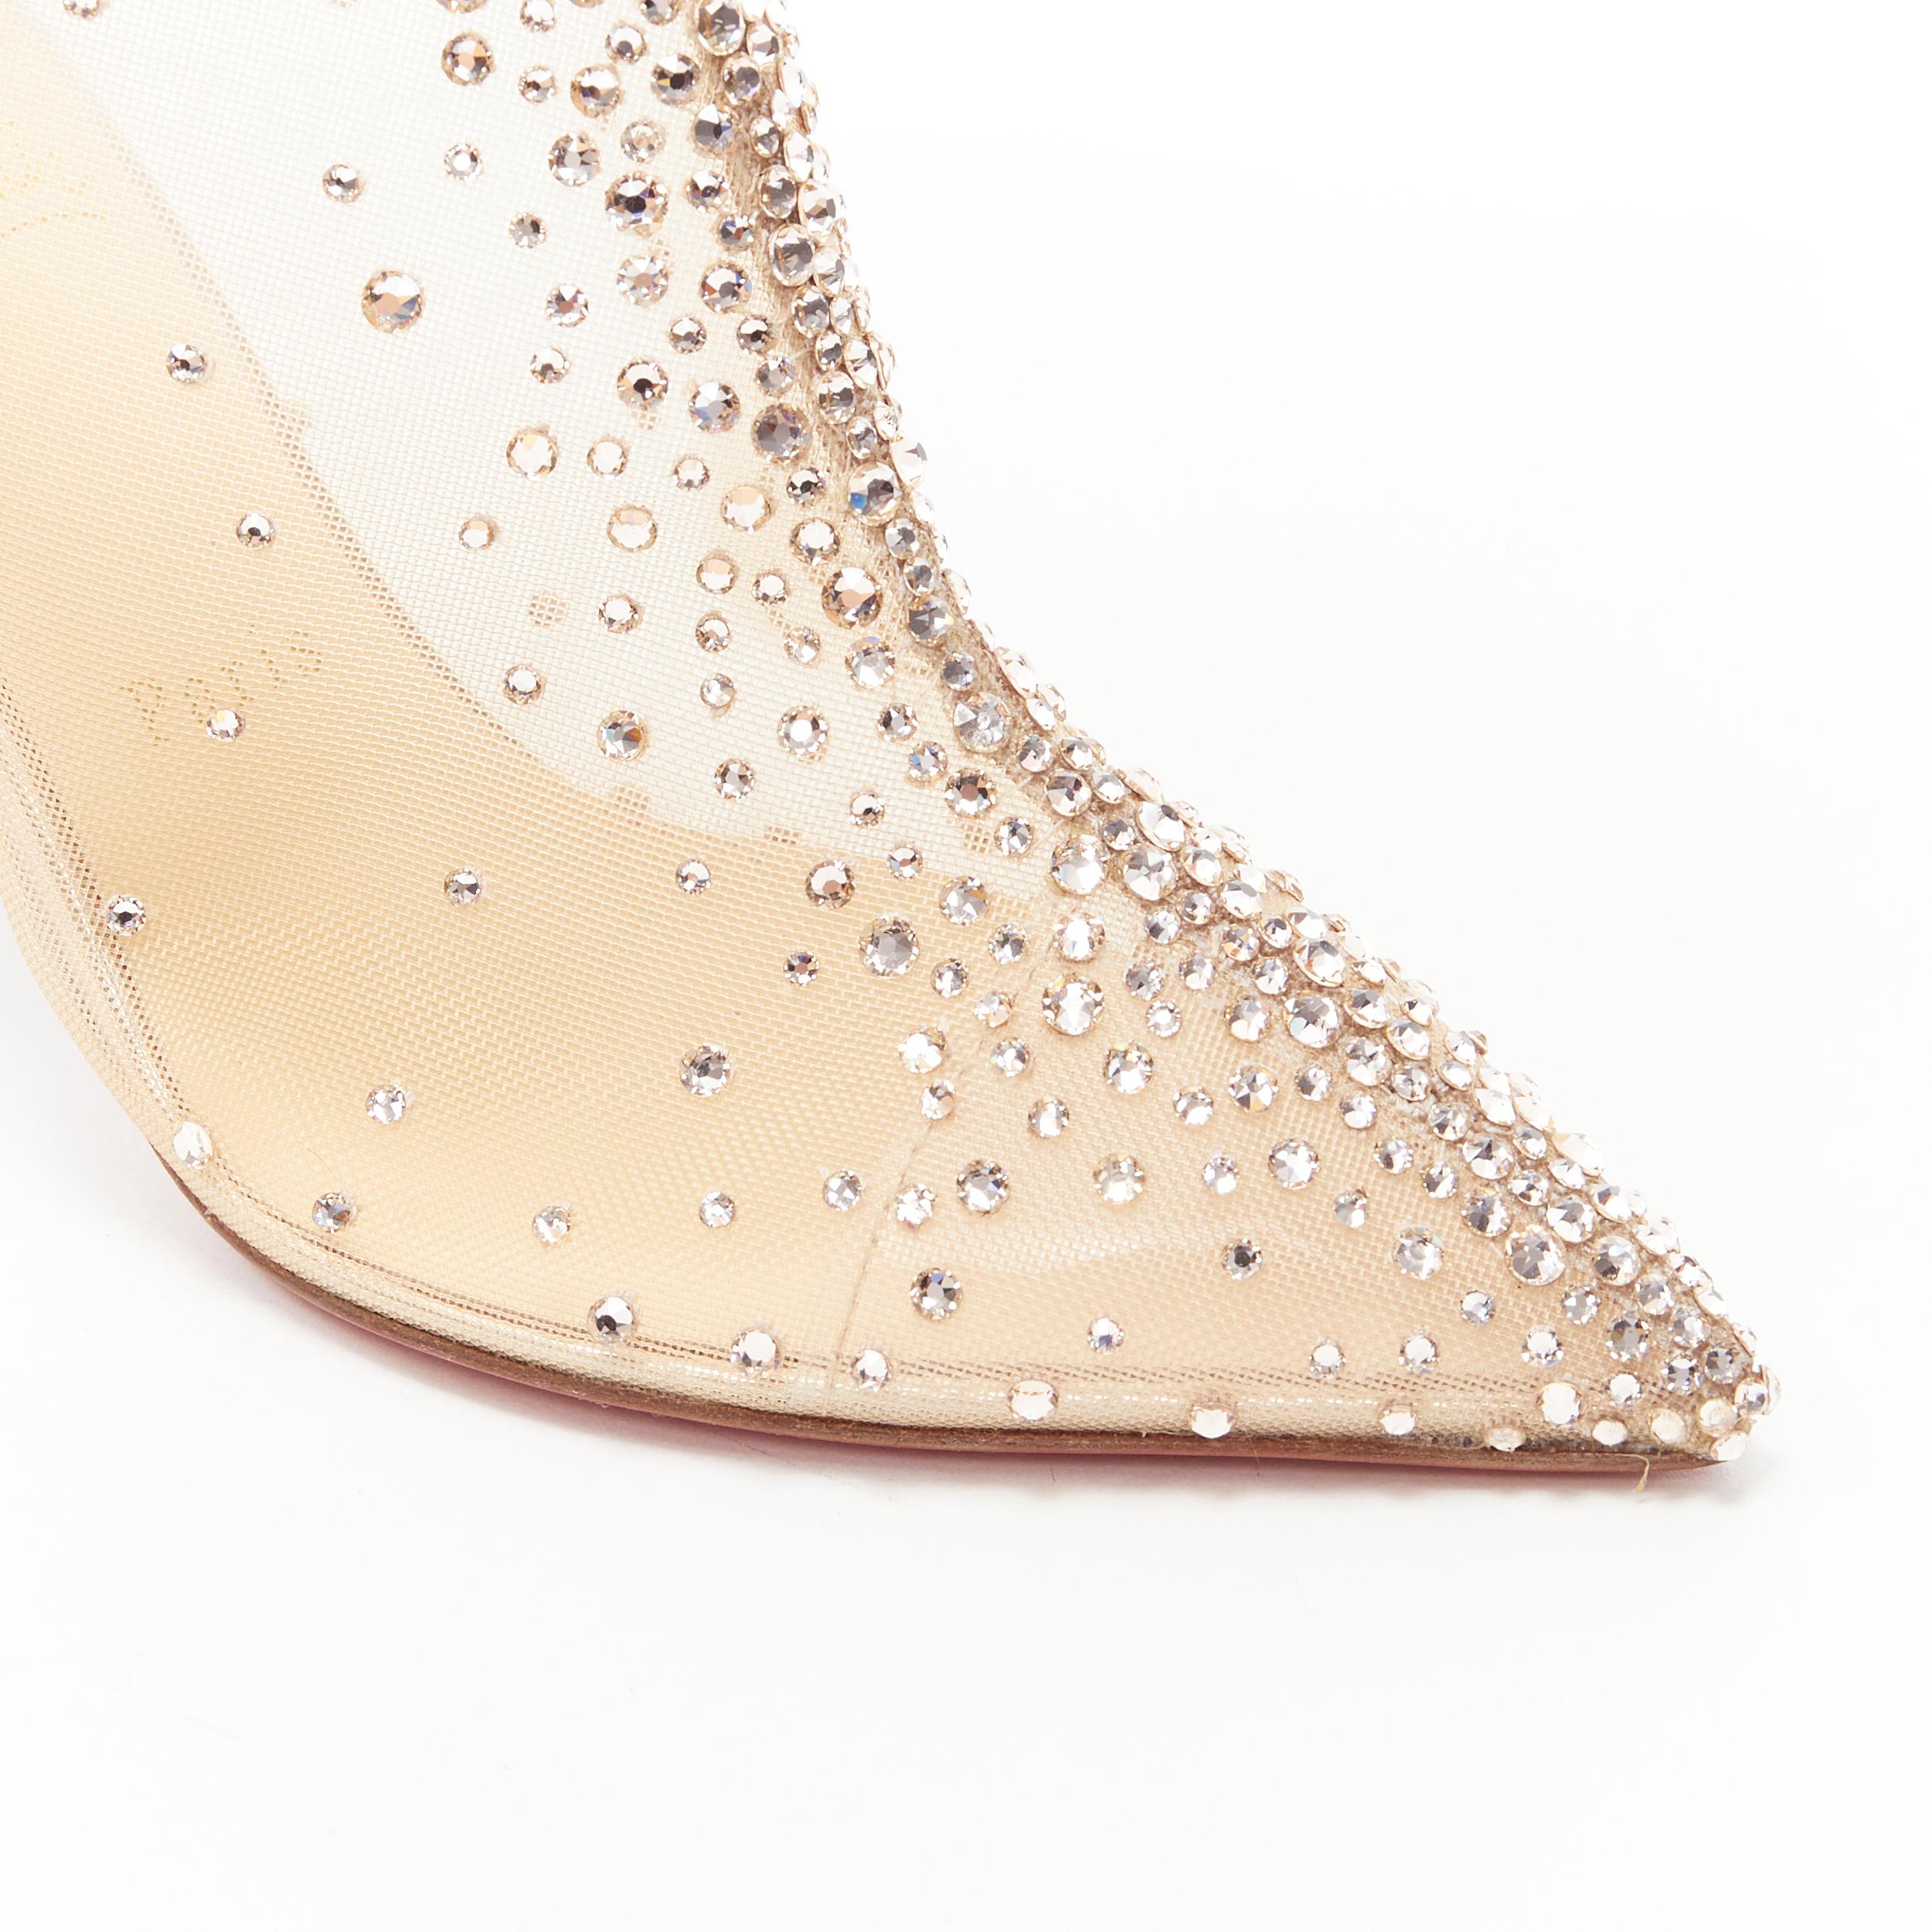 new CHRISTIAN LOUBOUTIN Constella 85 copper glitter degrade nude bootie EU37 
Reference: TGAS/B00244 
Brand: Christian Louboutin 
Designer: Christian Louboutin 
Material: Fabric 
Color: Beige 
Pattern: Solid 
Closure: Zip 
Made in: Italy